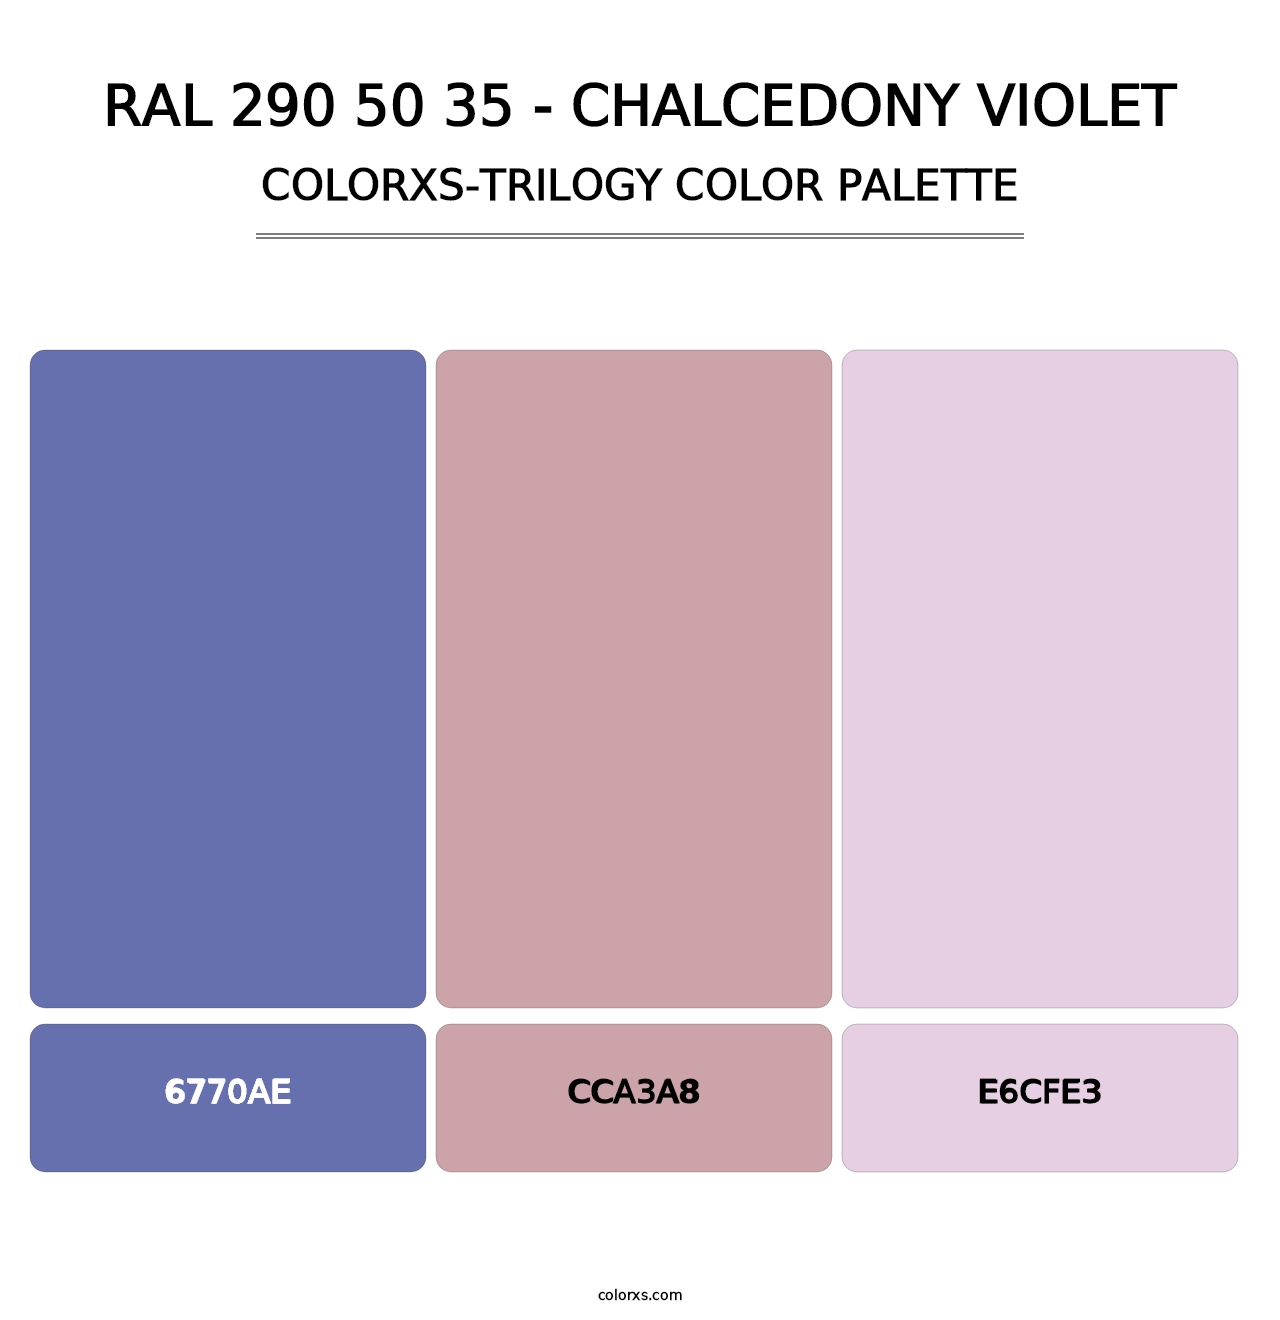 RAL 290 50 35 - Chalcedony Violet - Colorxs Trilogy Palette